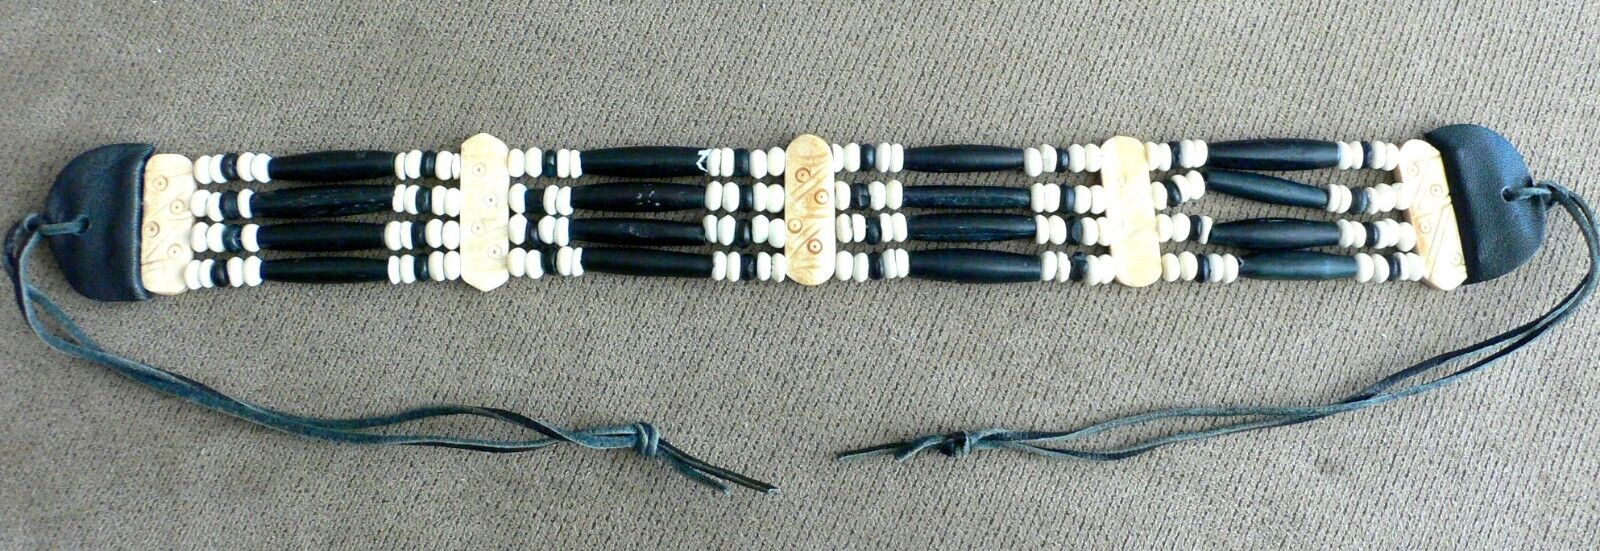 VINTAGE NATIVE AMERICAN BLACK AND WHITE BONE & LEATHER NECKLACE.N.R.